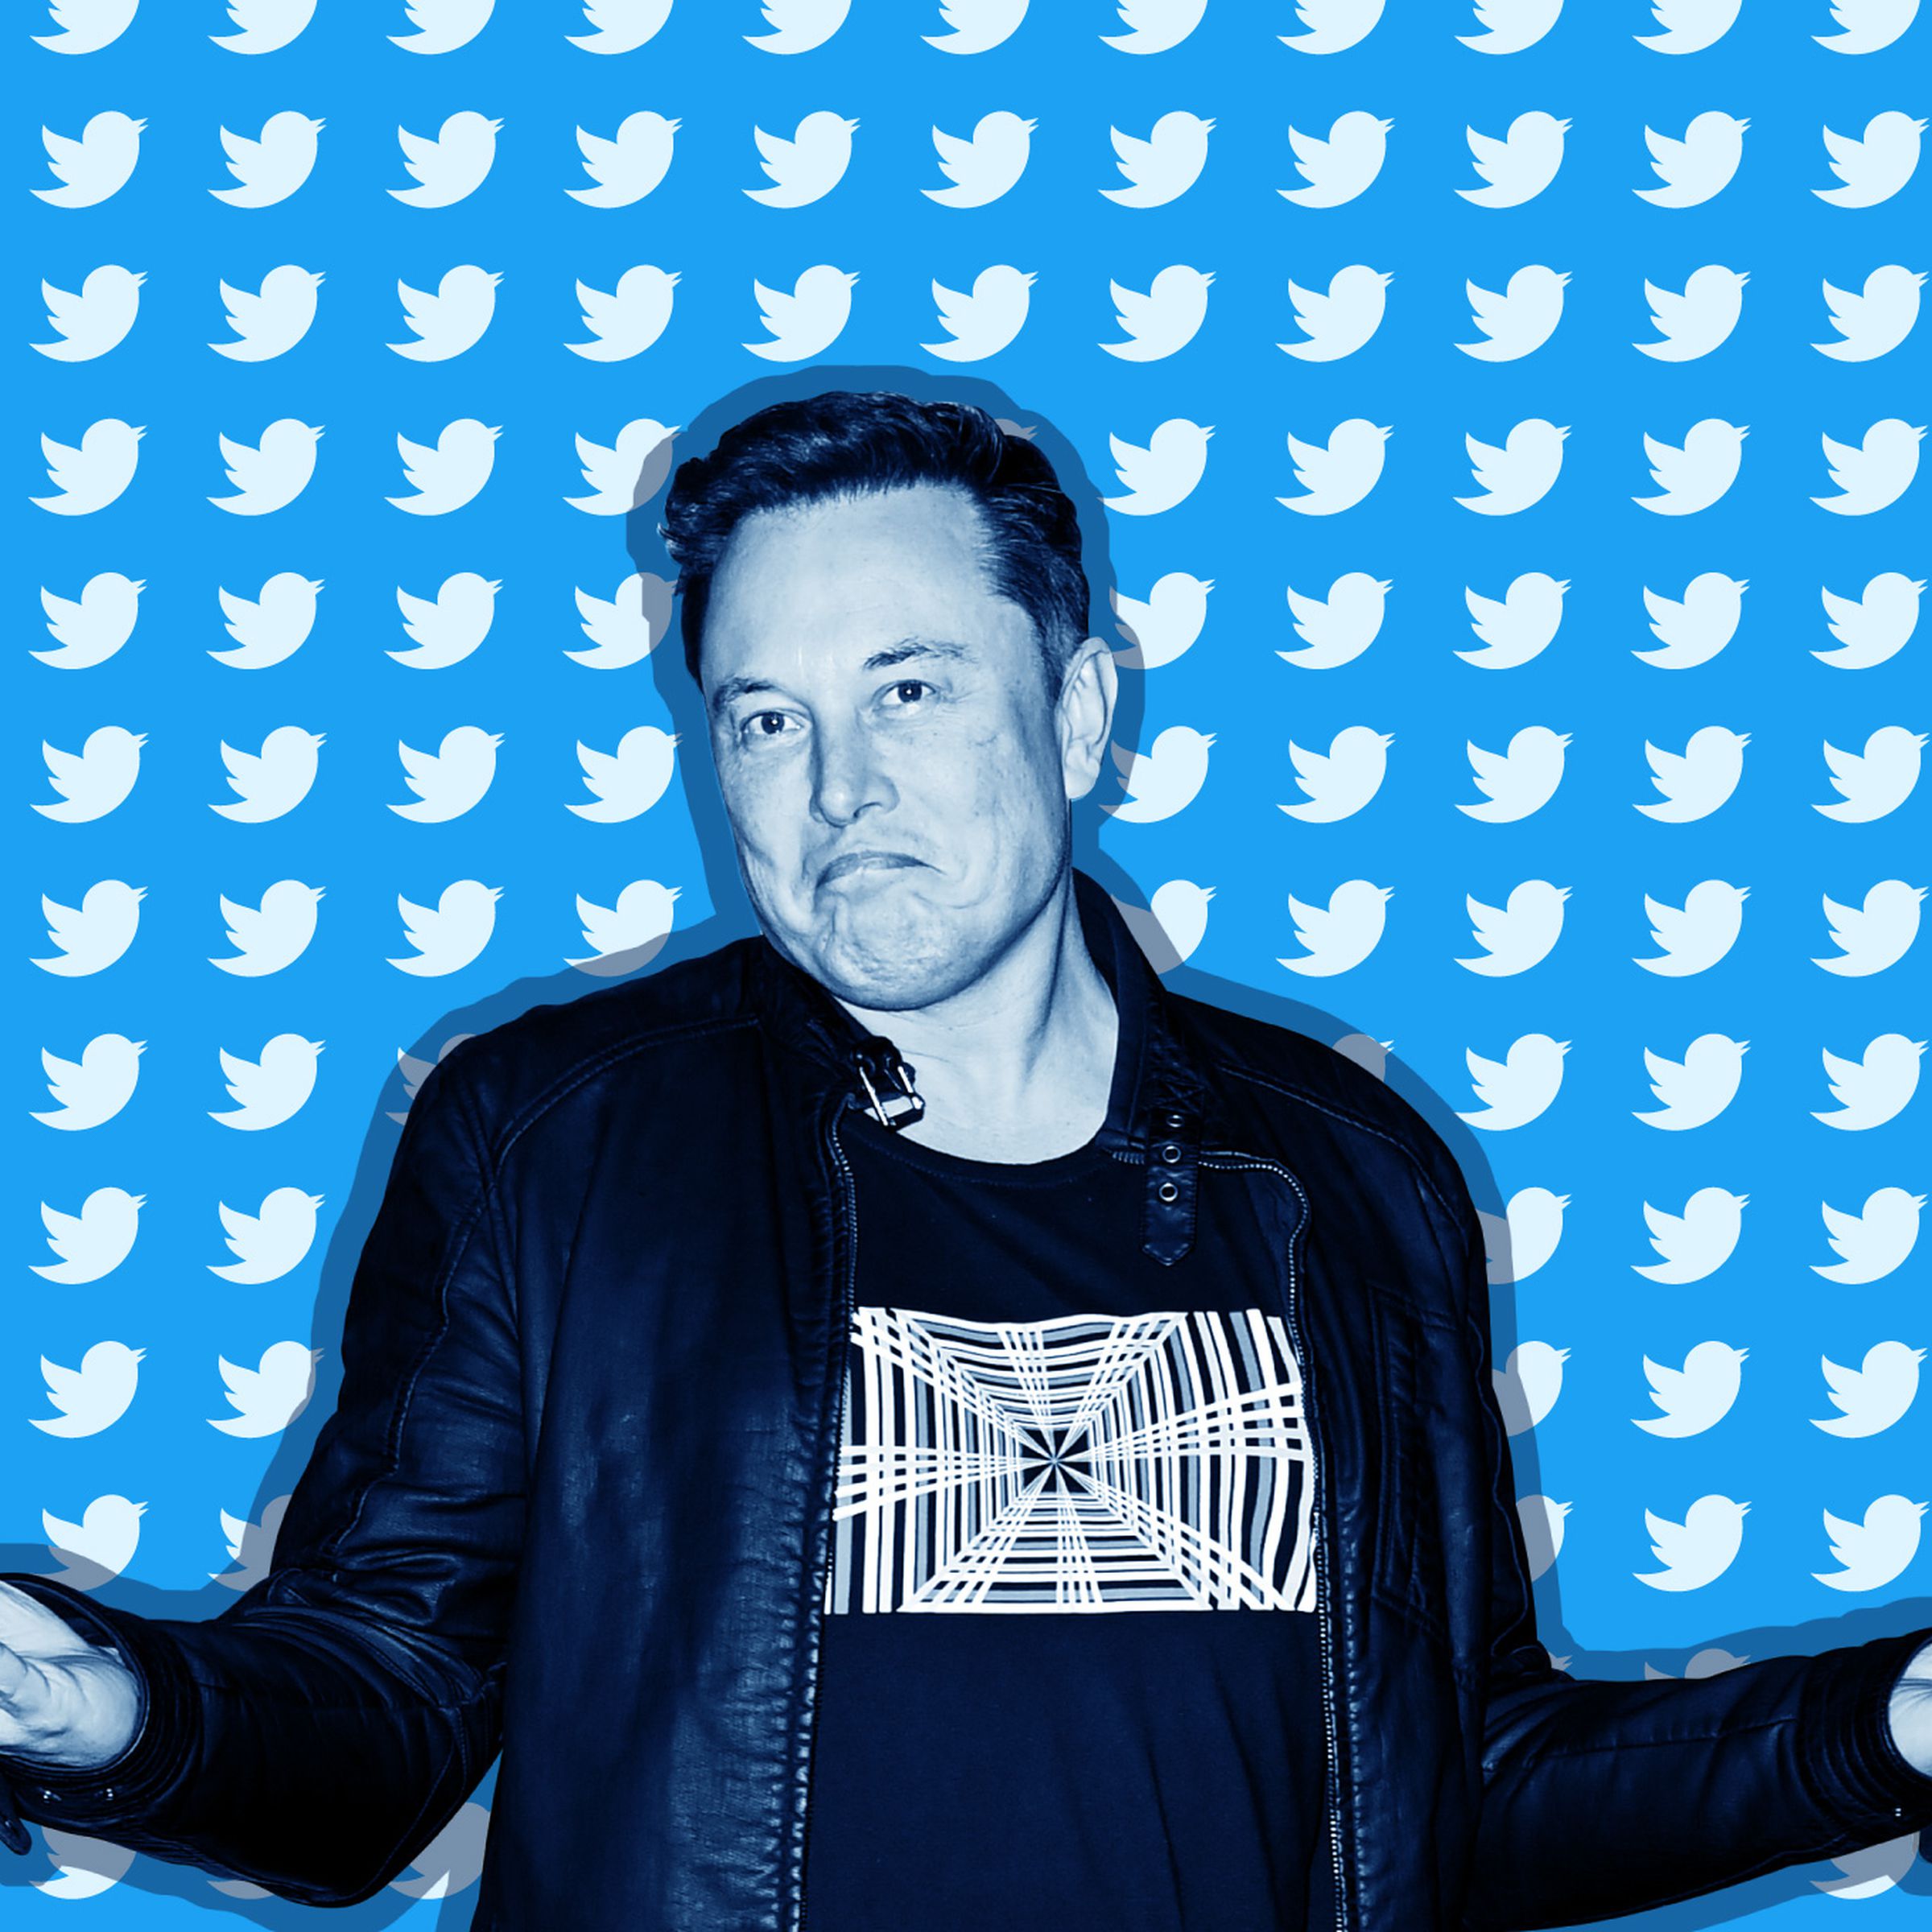 Elon Musk shrugging on a background with the Twitter logo